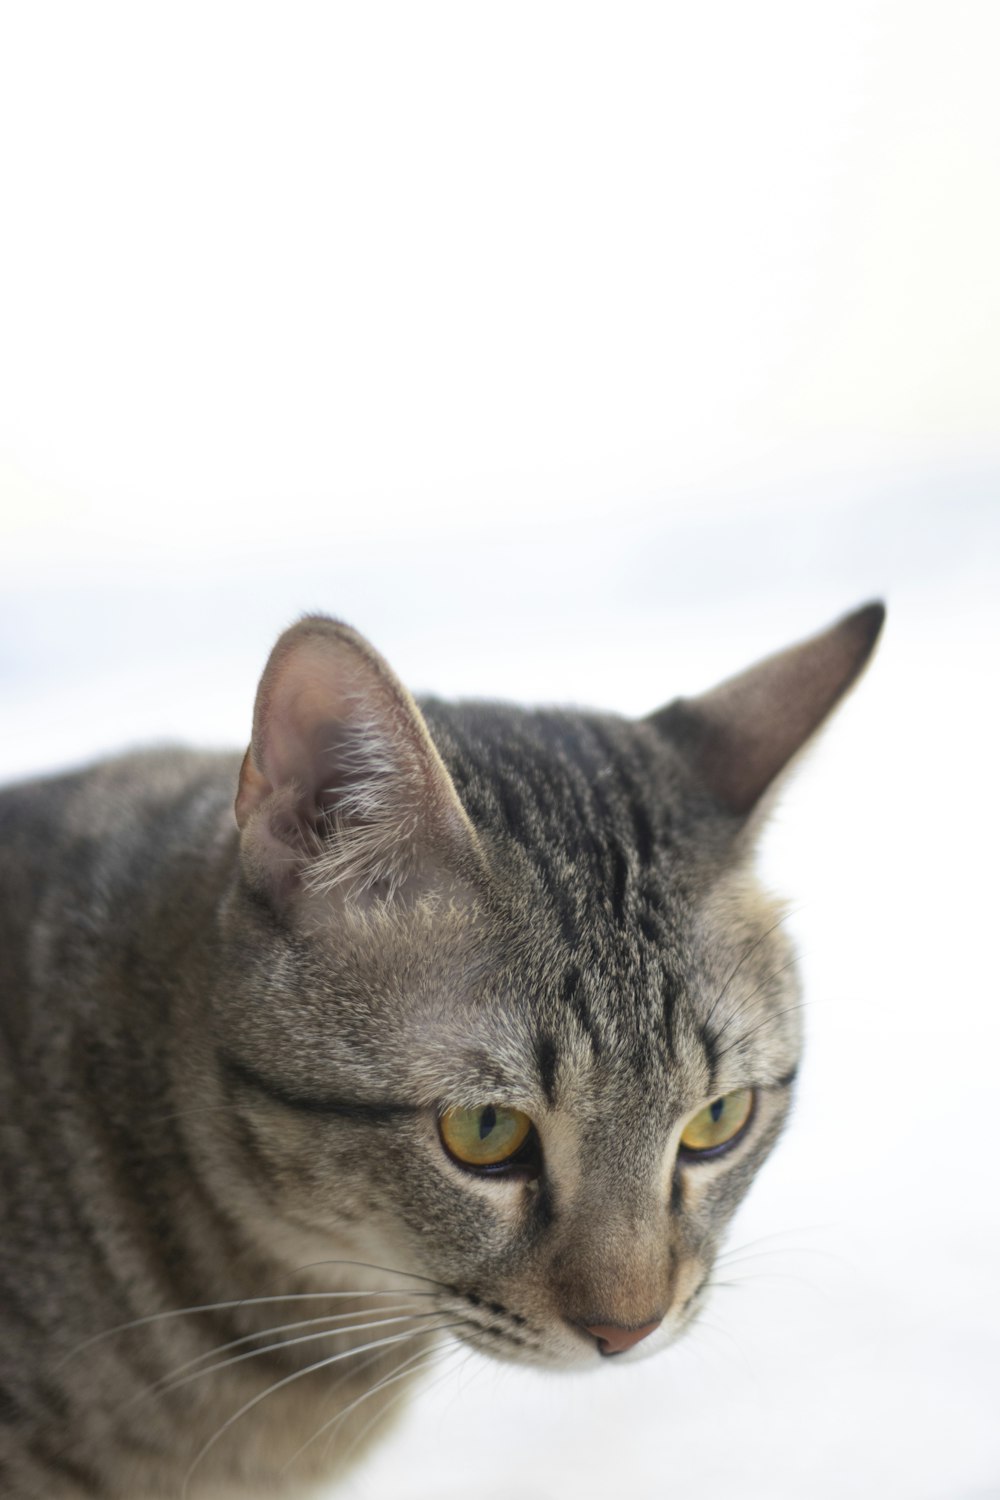 a gray cat with yellow eyes looking at the camera